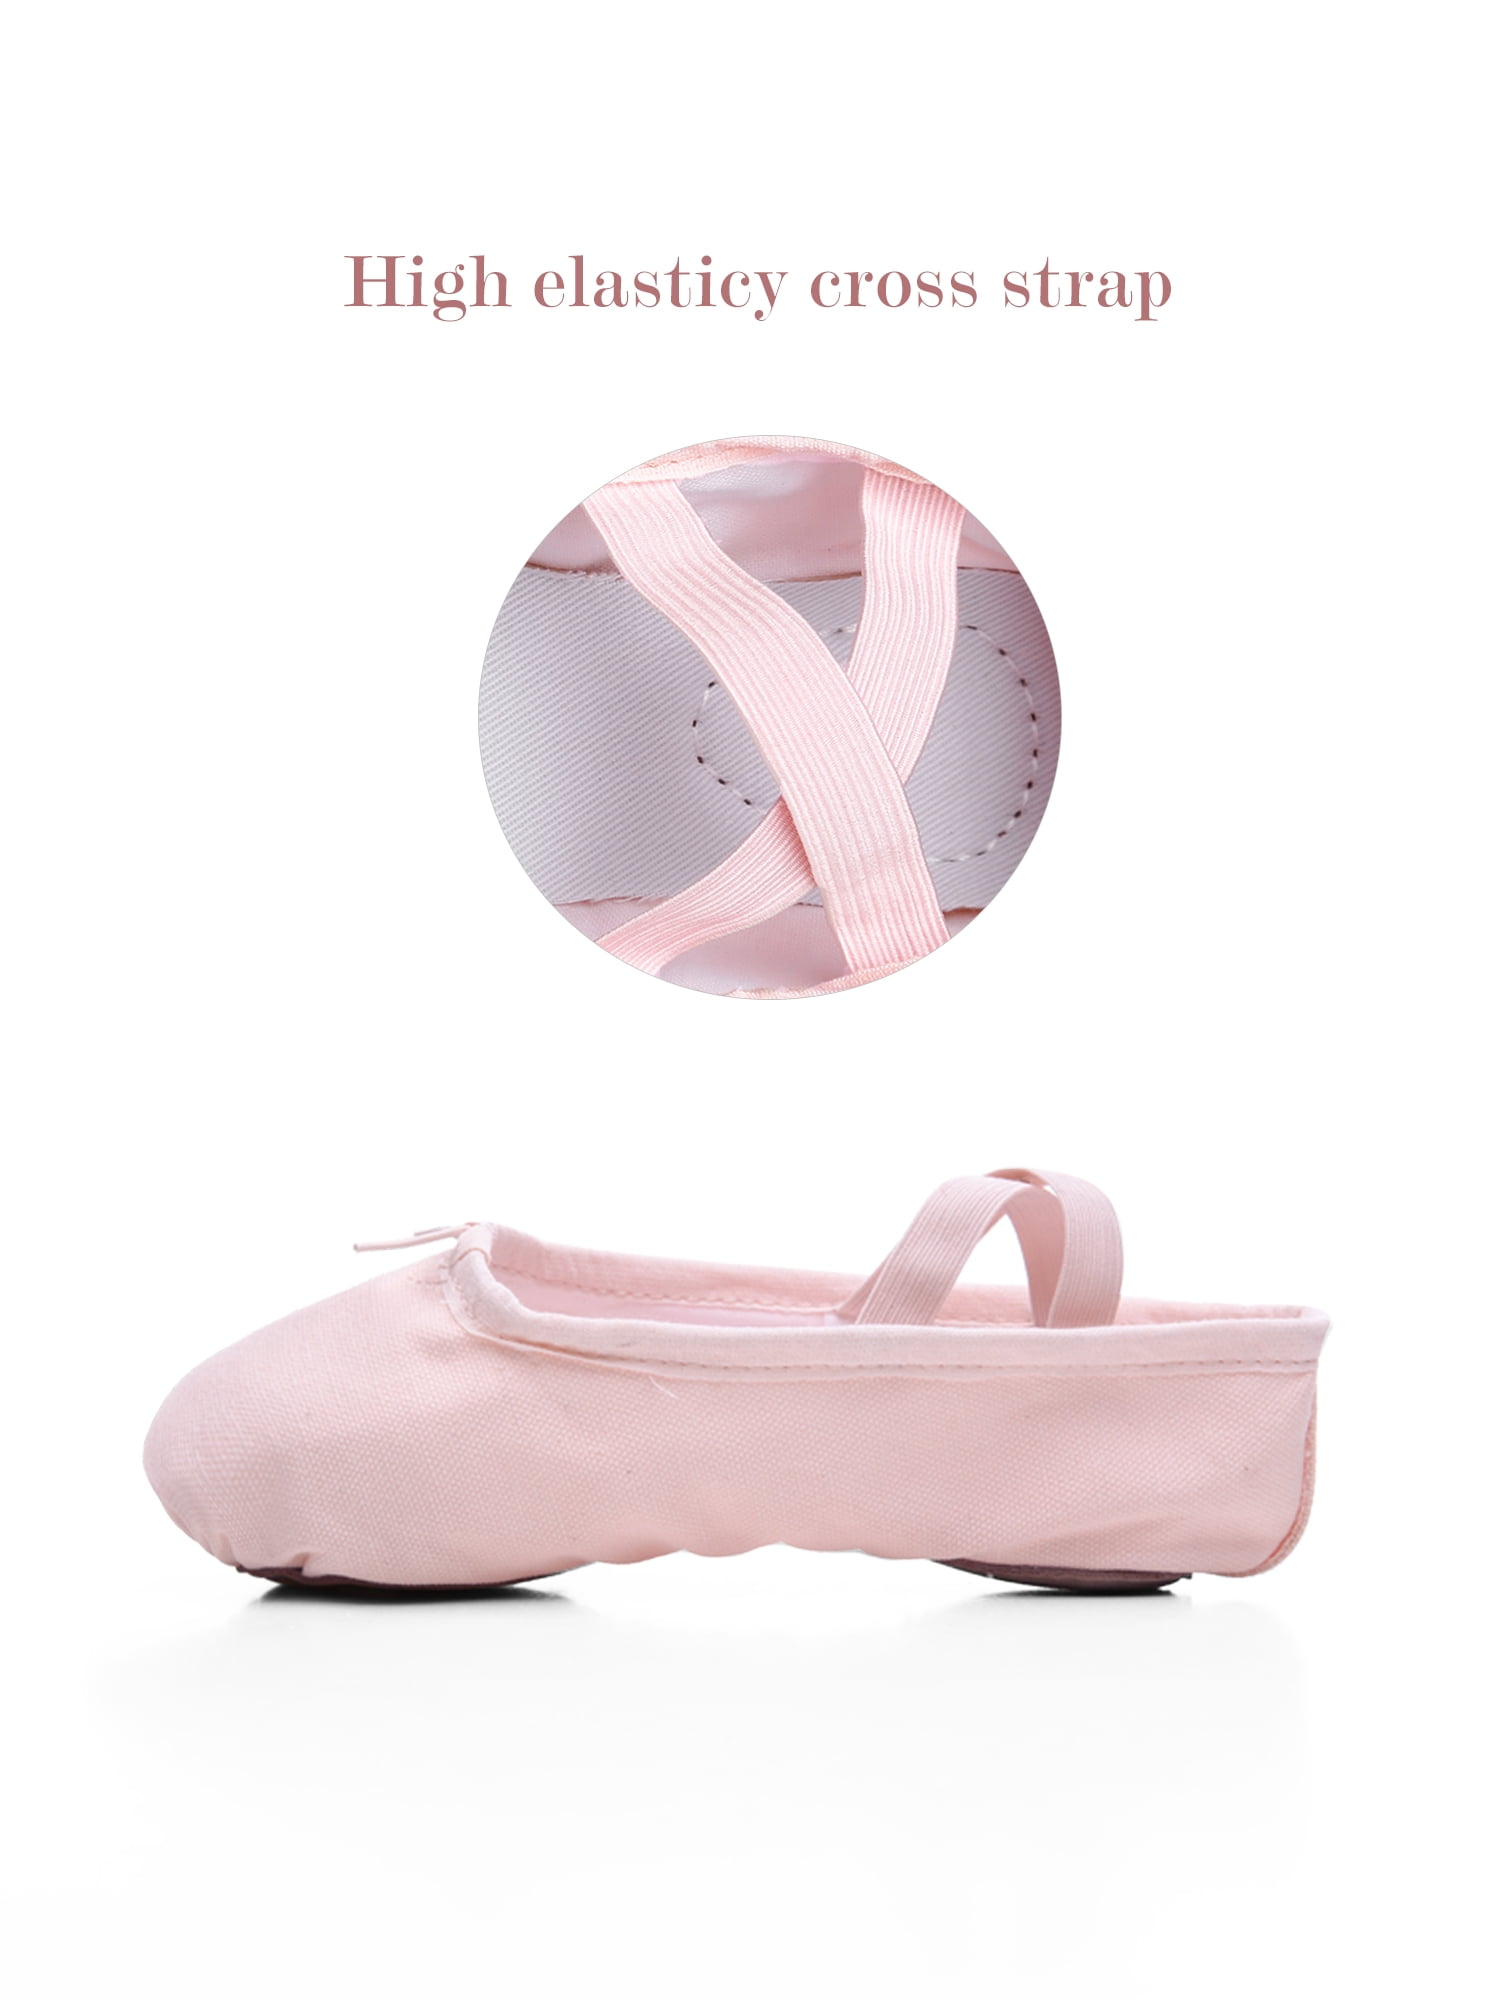 Ruanyi Dance Shoes Canvas Yoga Shoes Cat Claw Ballet Shoes Leather Non-Slip Bottom for Girl Women Color : 4, Size : 44 EU